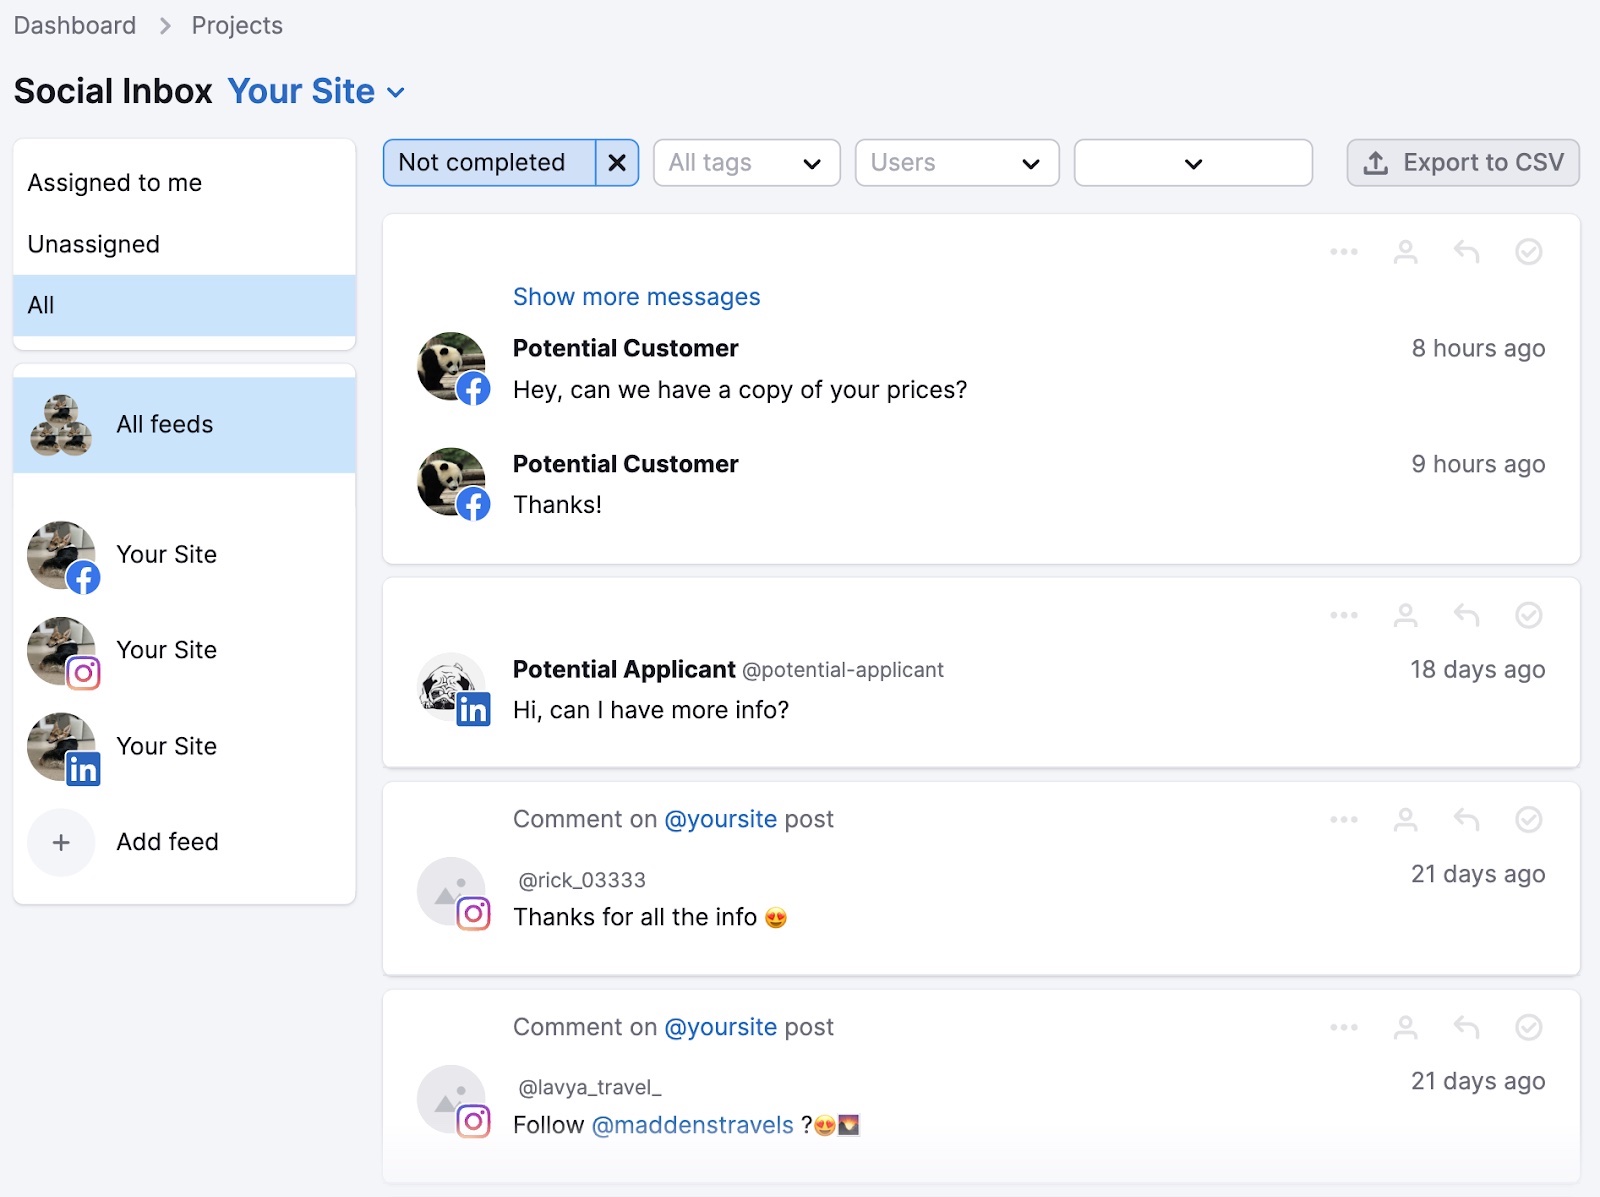 Social Inbox dashboard showing responses to messages and comments across multiple social media platforms.